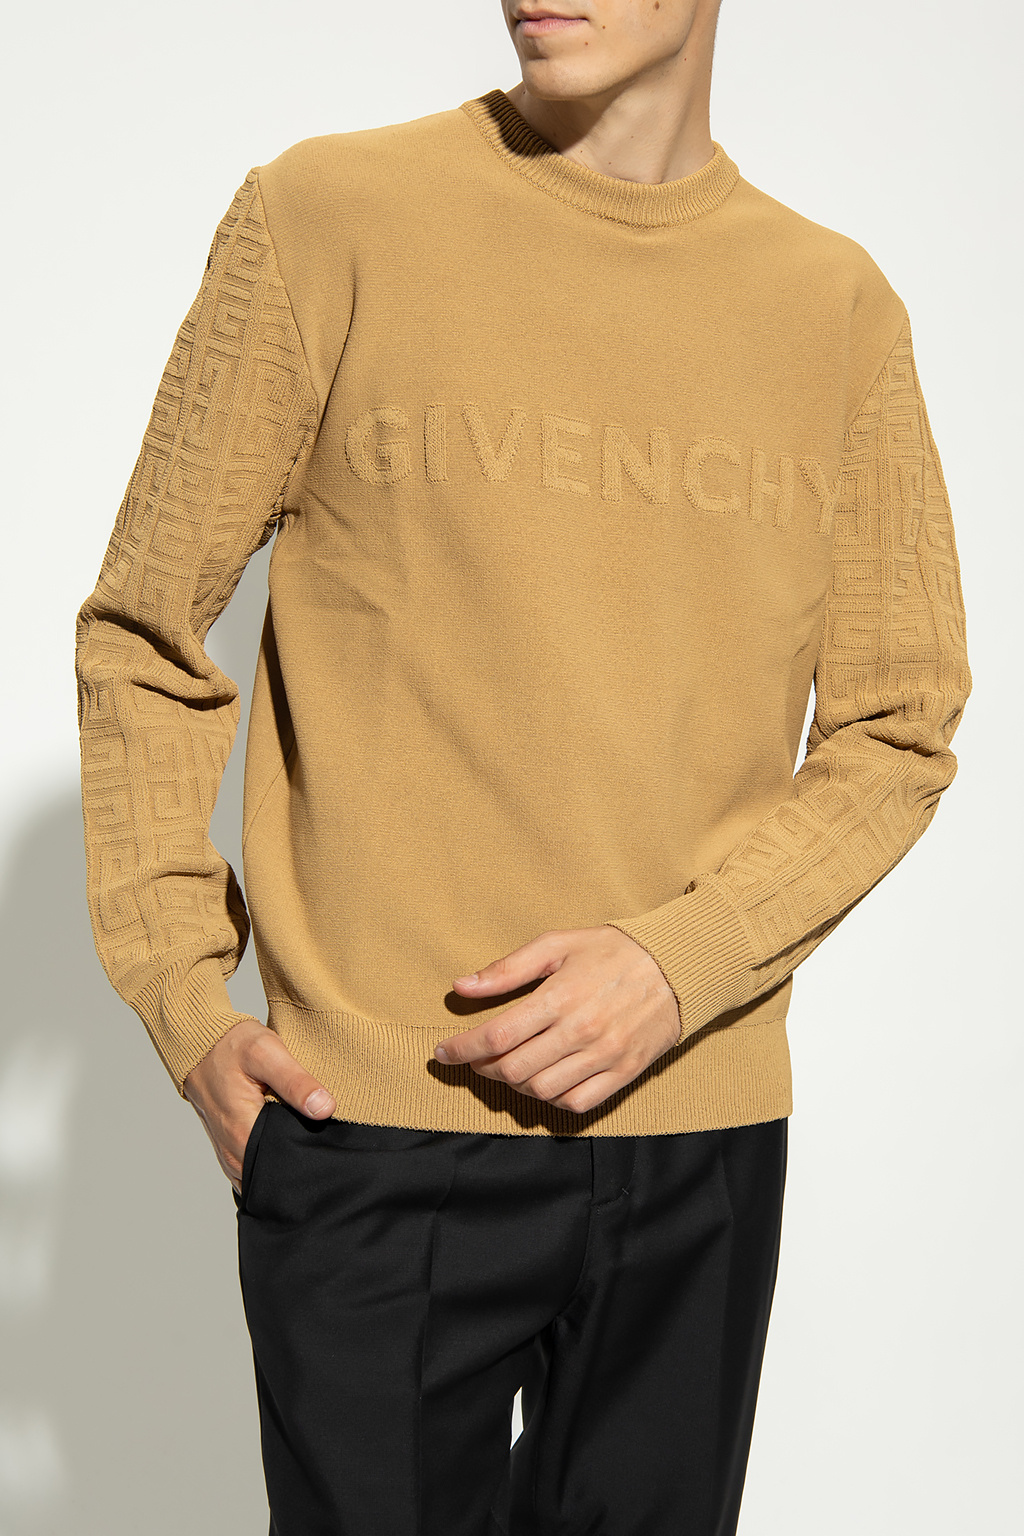 Givenchy Givenchy Tape-Deck Sweatshirt